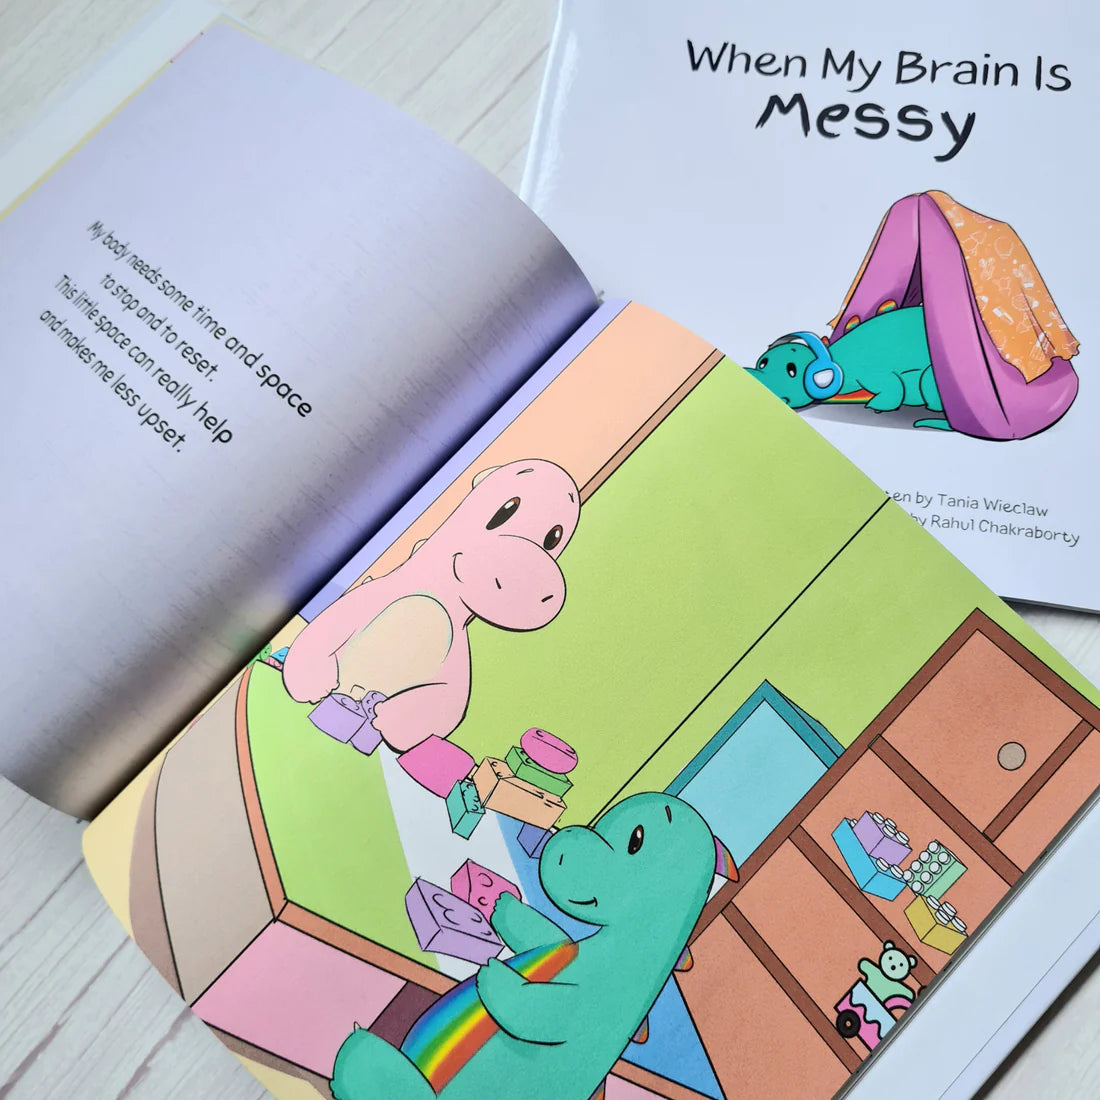 When_My_Brain_Is_Messy._A_Childrens_Picture_Book_about_Autism_and_Sensory_Processing_Differences_Tania_Wieclaw_page